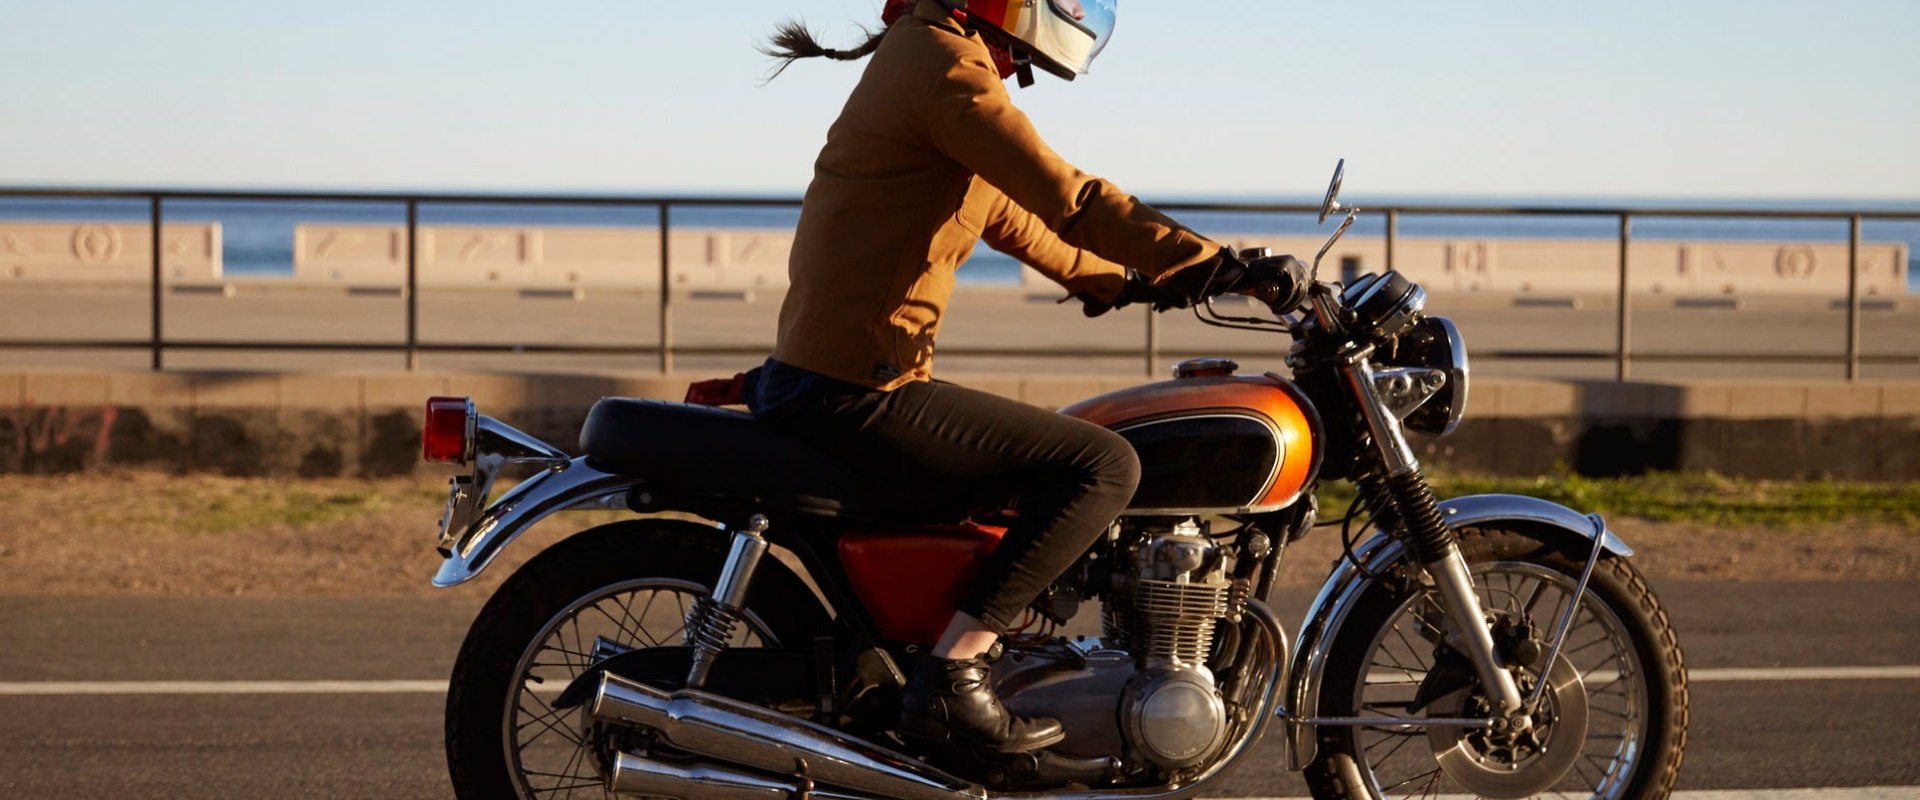 Motorcycle Insurance for College Students Under 21